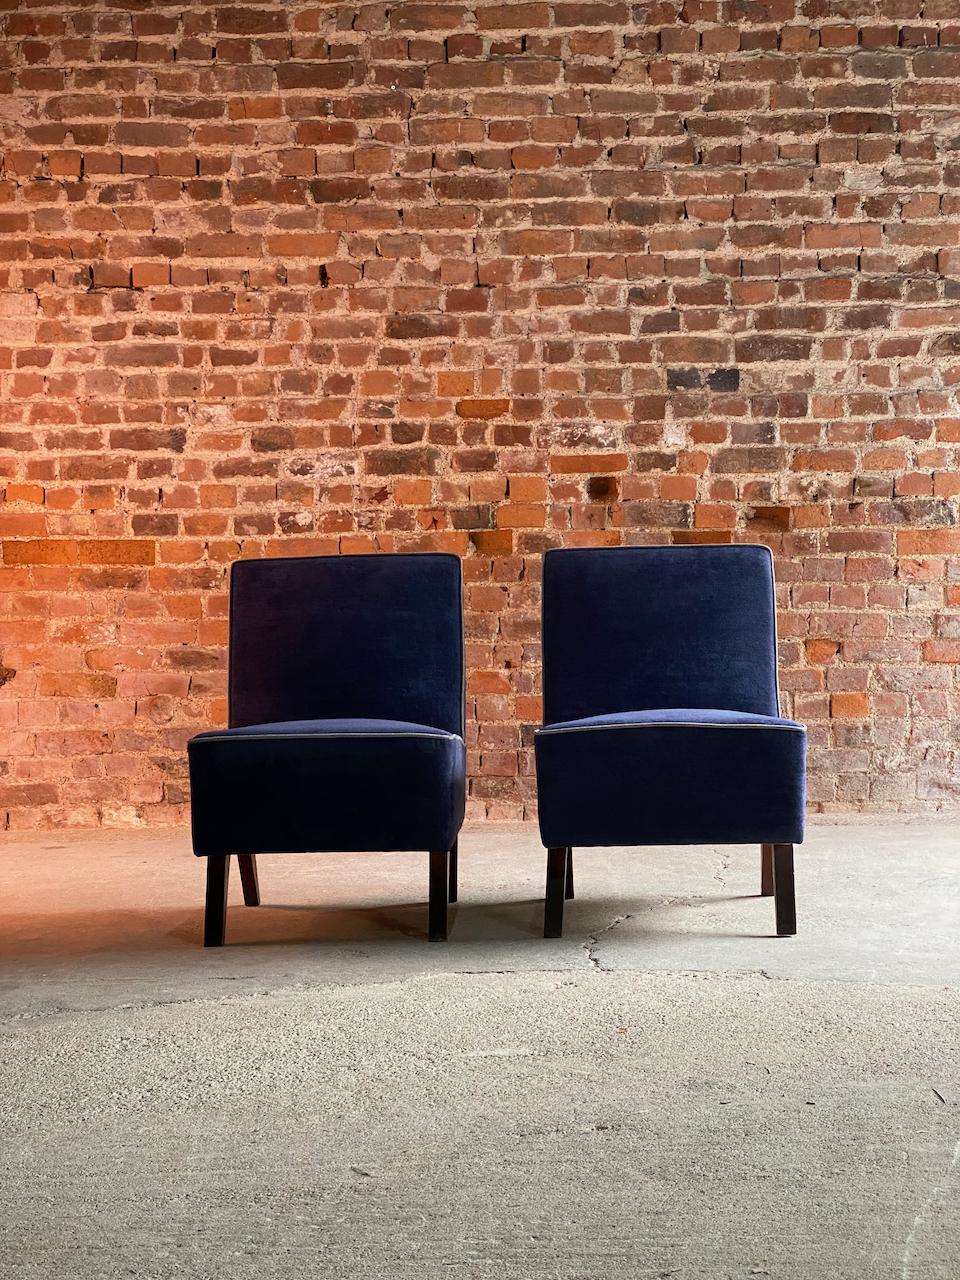 Mid-20th Century Le Corbusier & Pierre Jeanneret LCPJ-010811 ‘Low Lounge’ Chairs Circa 1954-55 For Sale